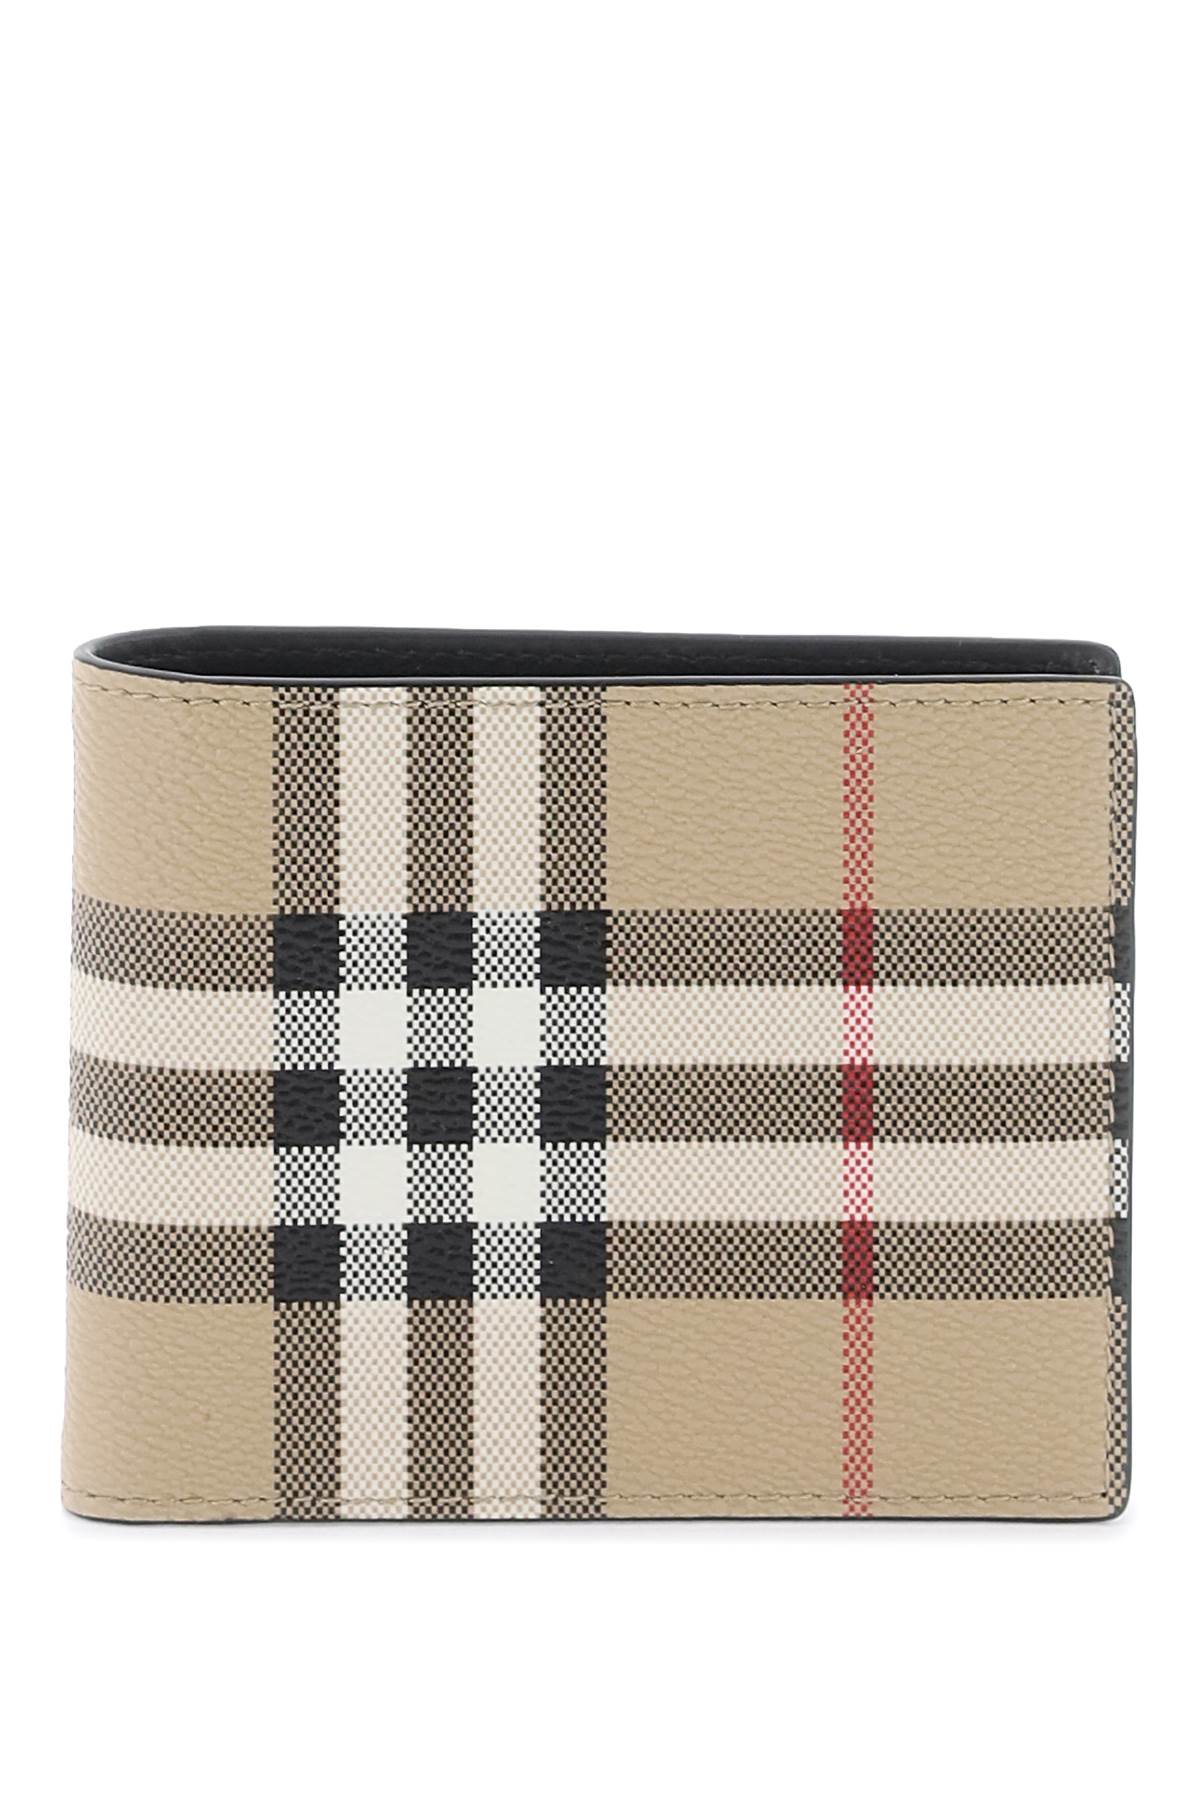 Burberry BURBERRY bifold wallet with check motif